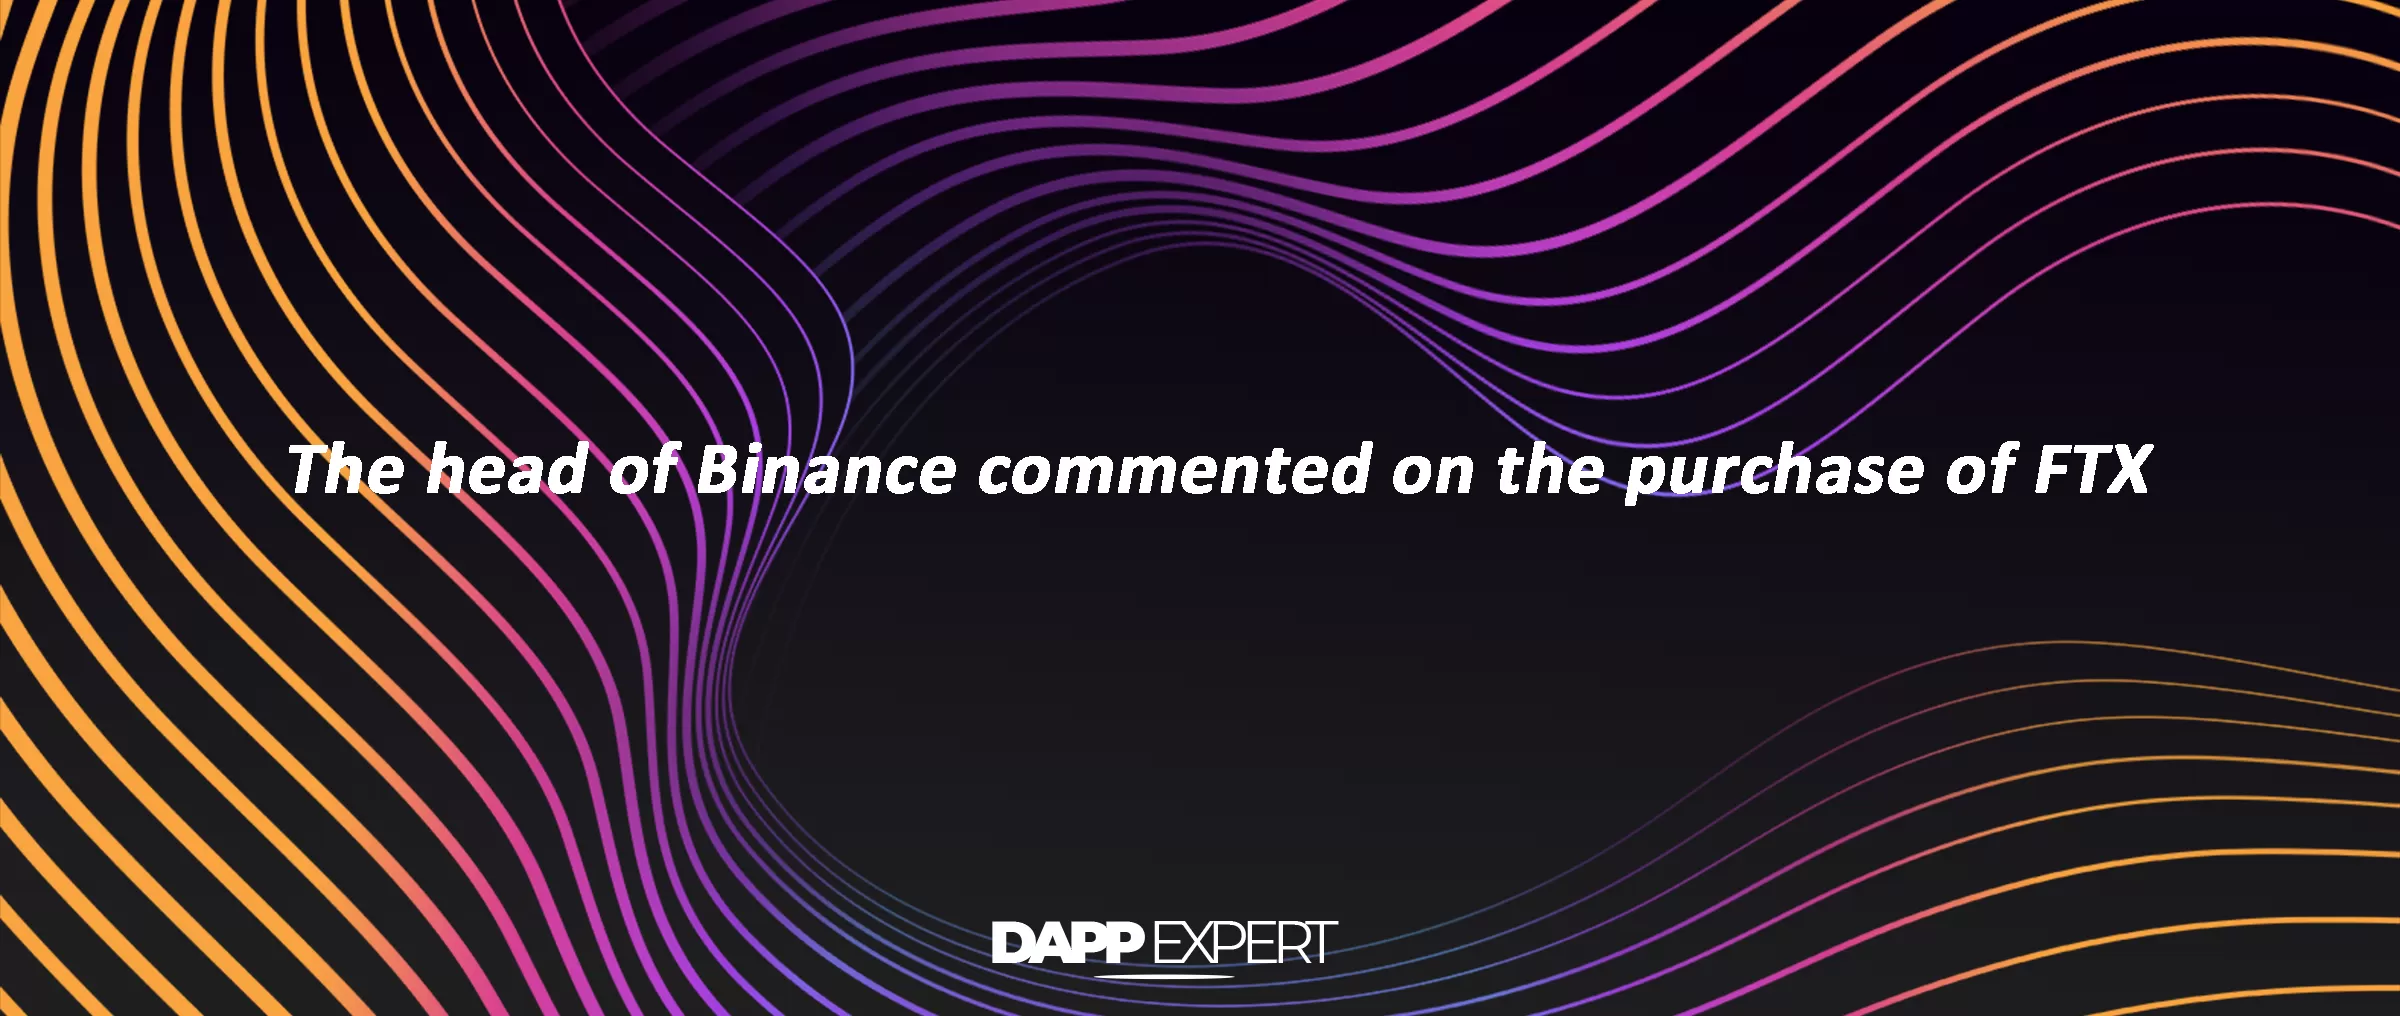 The head of Binance commented on the purchase of FTX